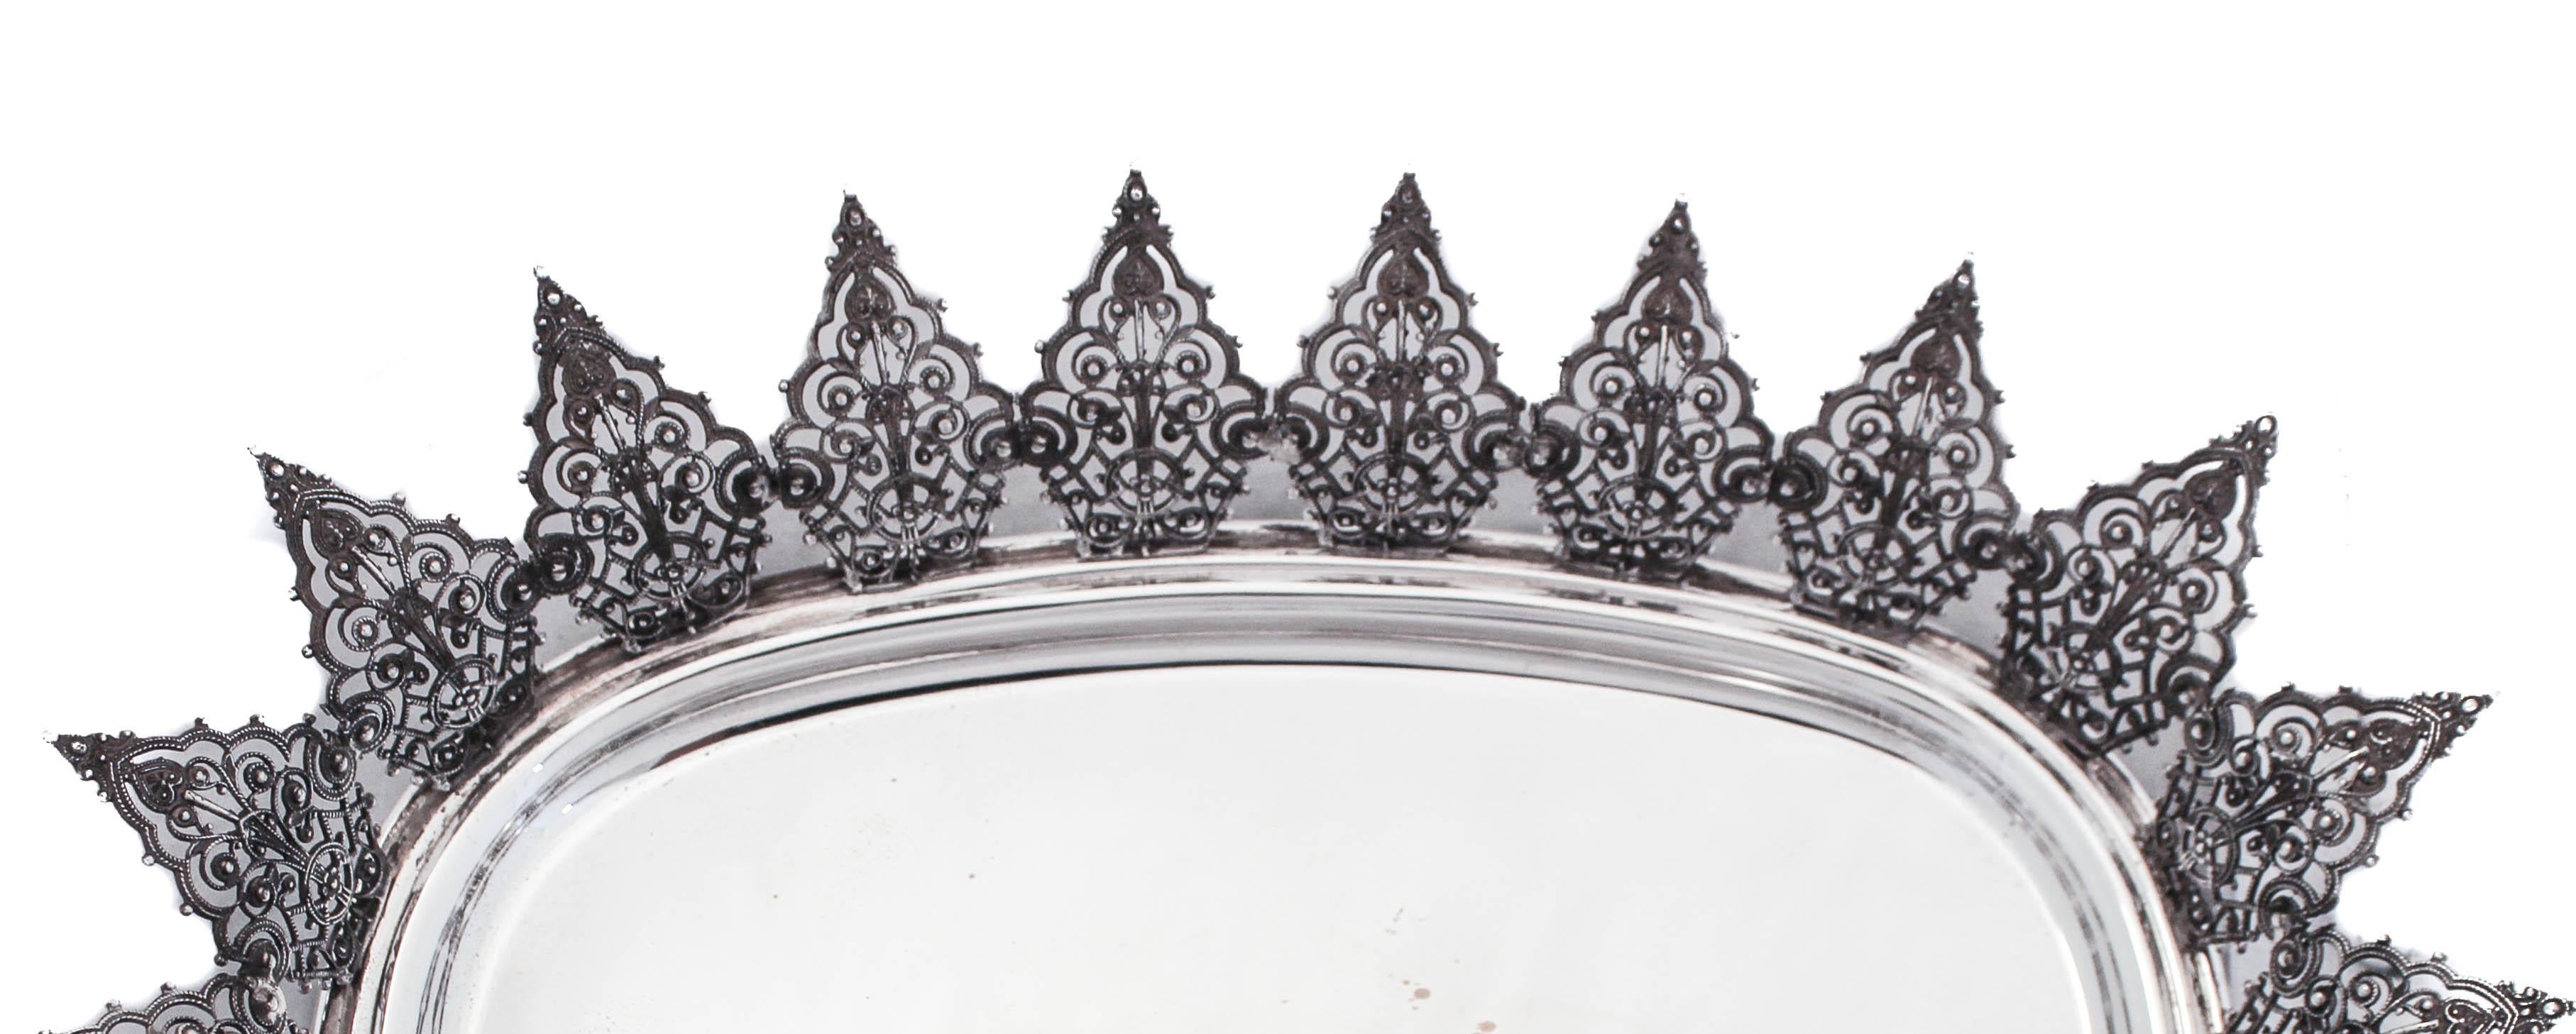 Being offered is a sterling silver Italian oblong dish from the 1960’s — think Federico Fellini and Marcelo Mastroianni in La Dolce Vita. It is smooth and flat in the center but but beware, around the edge is a crown-like design with spikes that